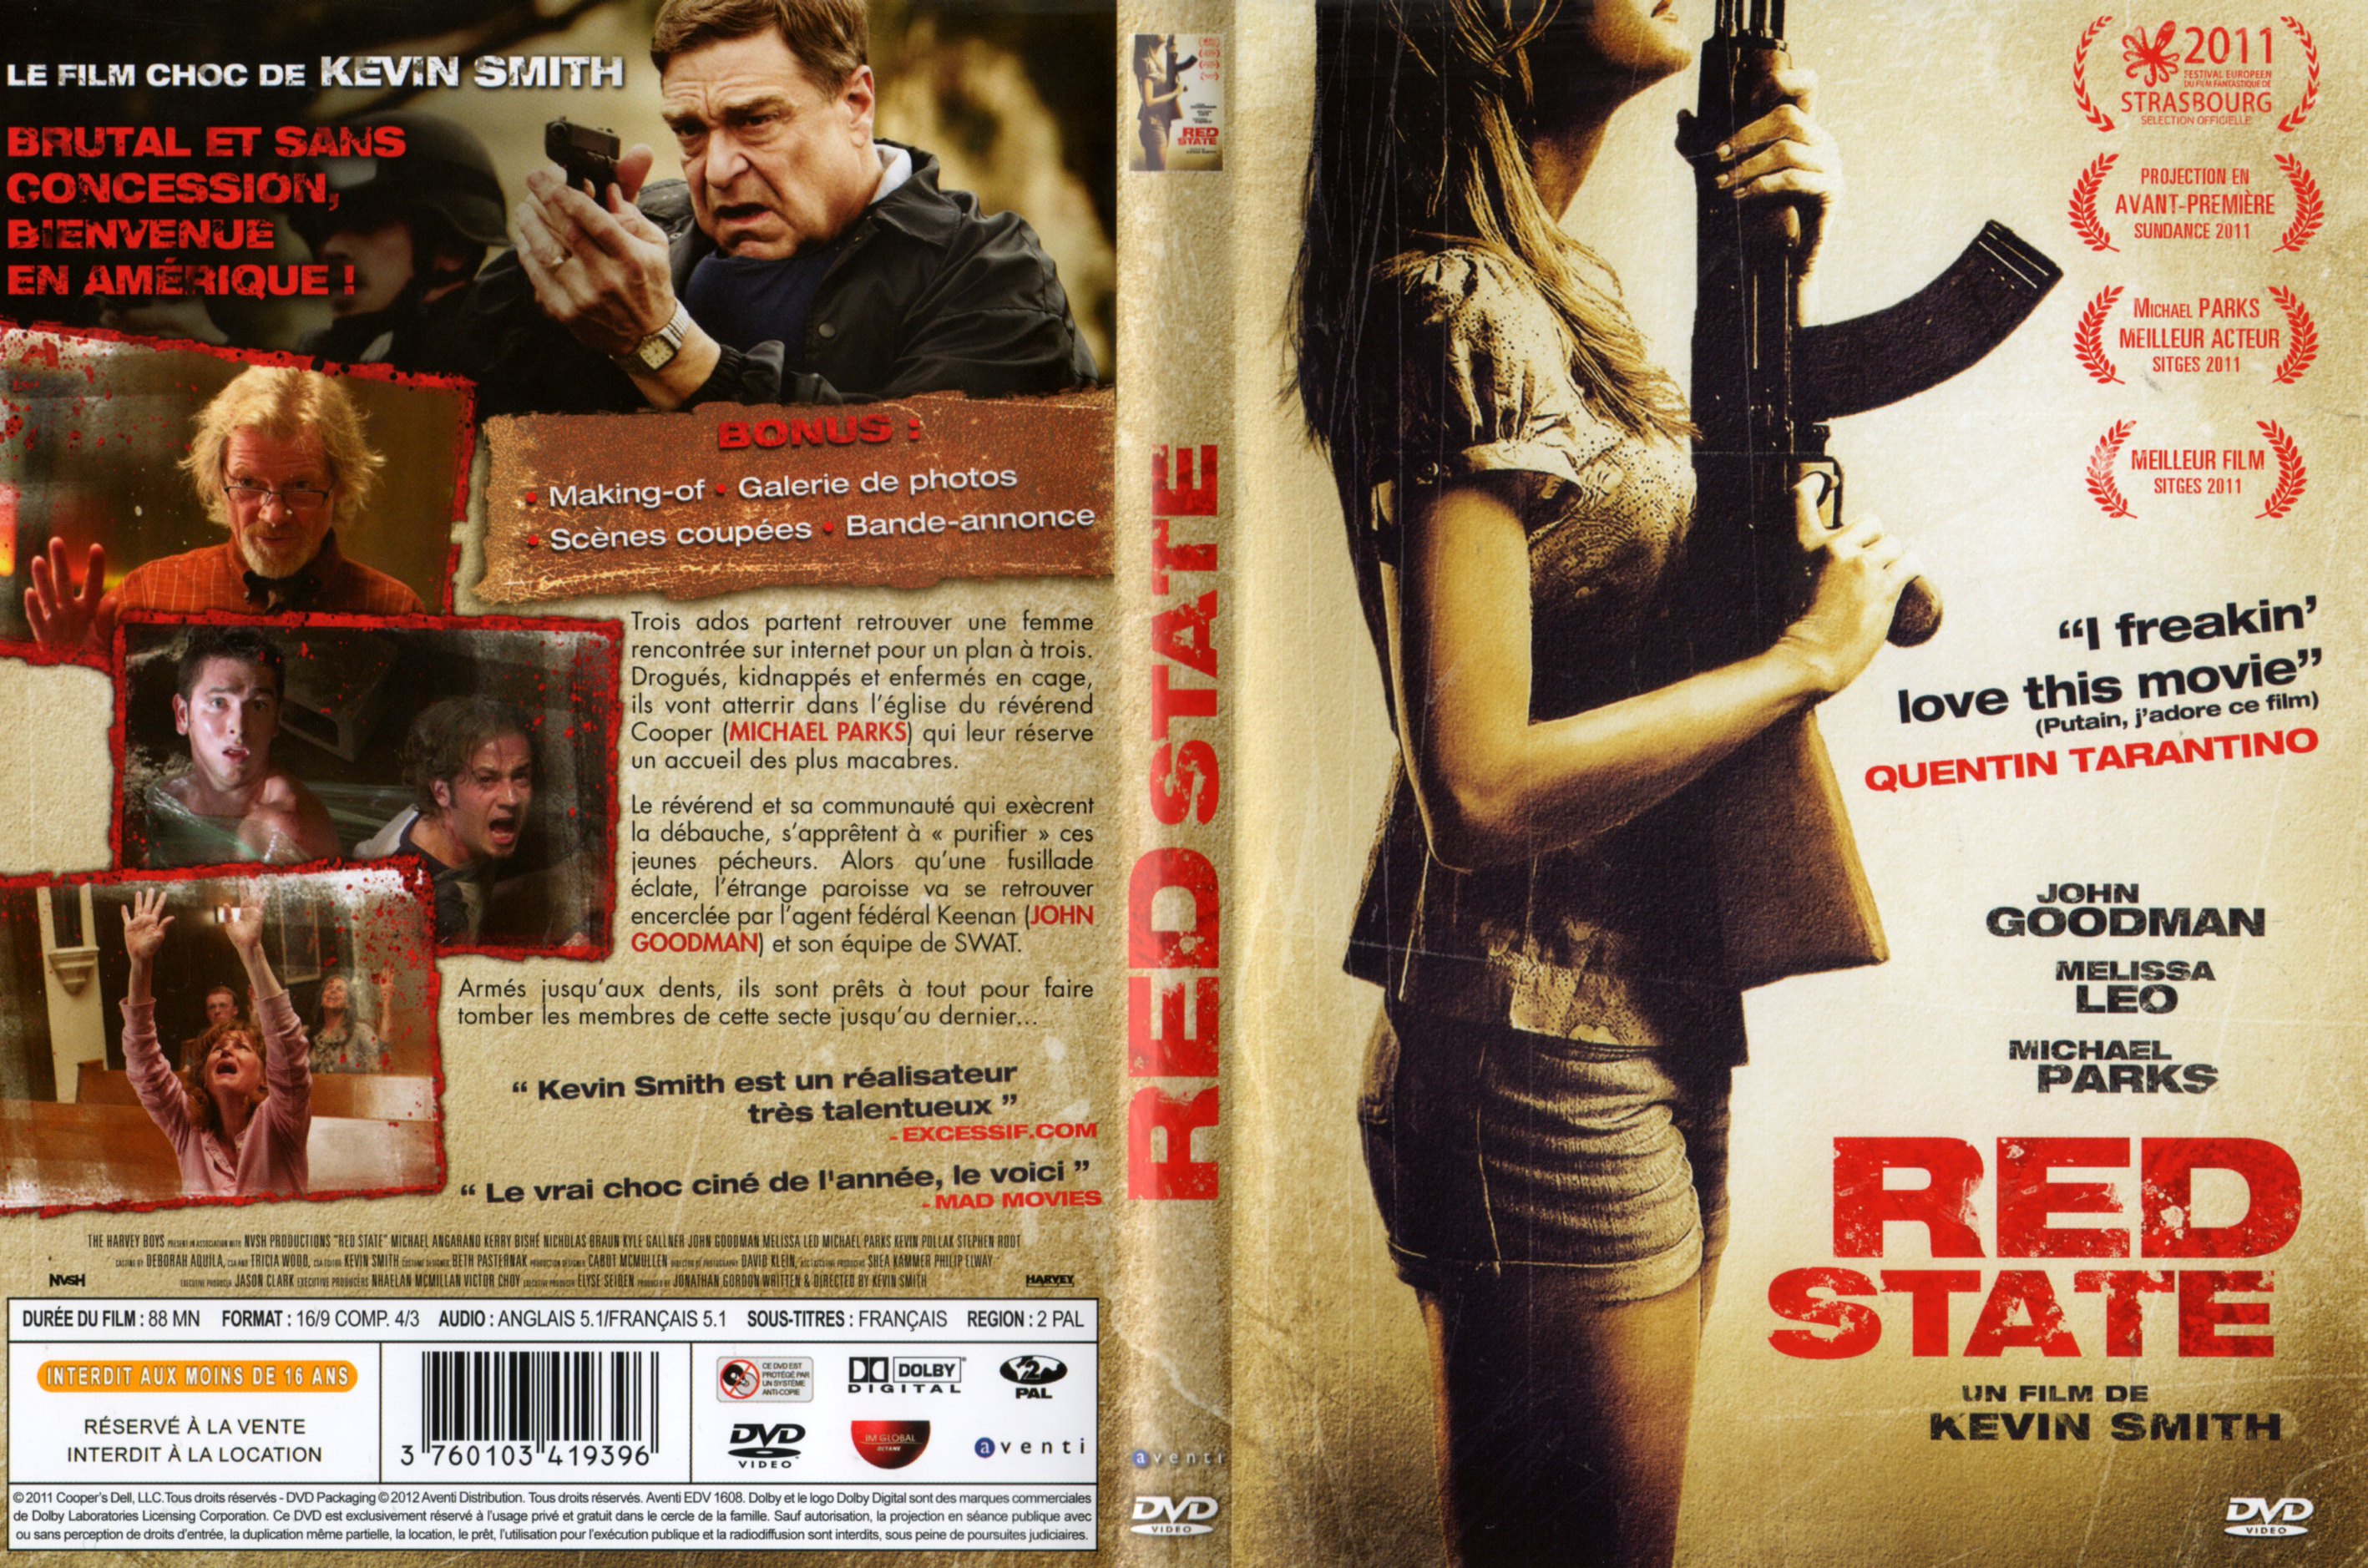 Jaquette DVD Red State